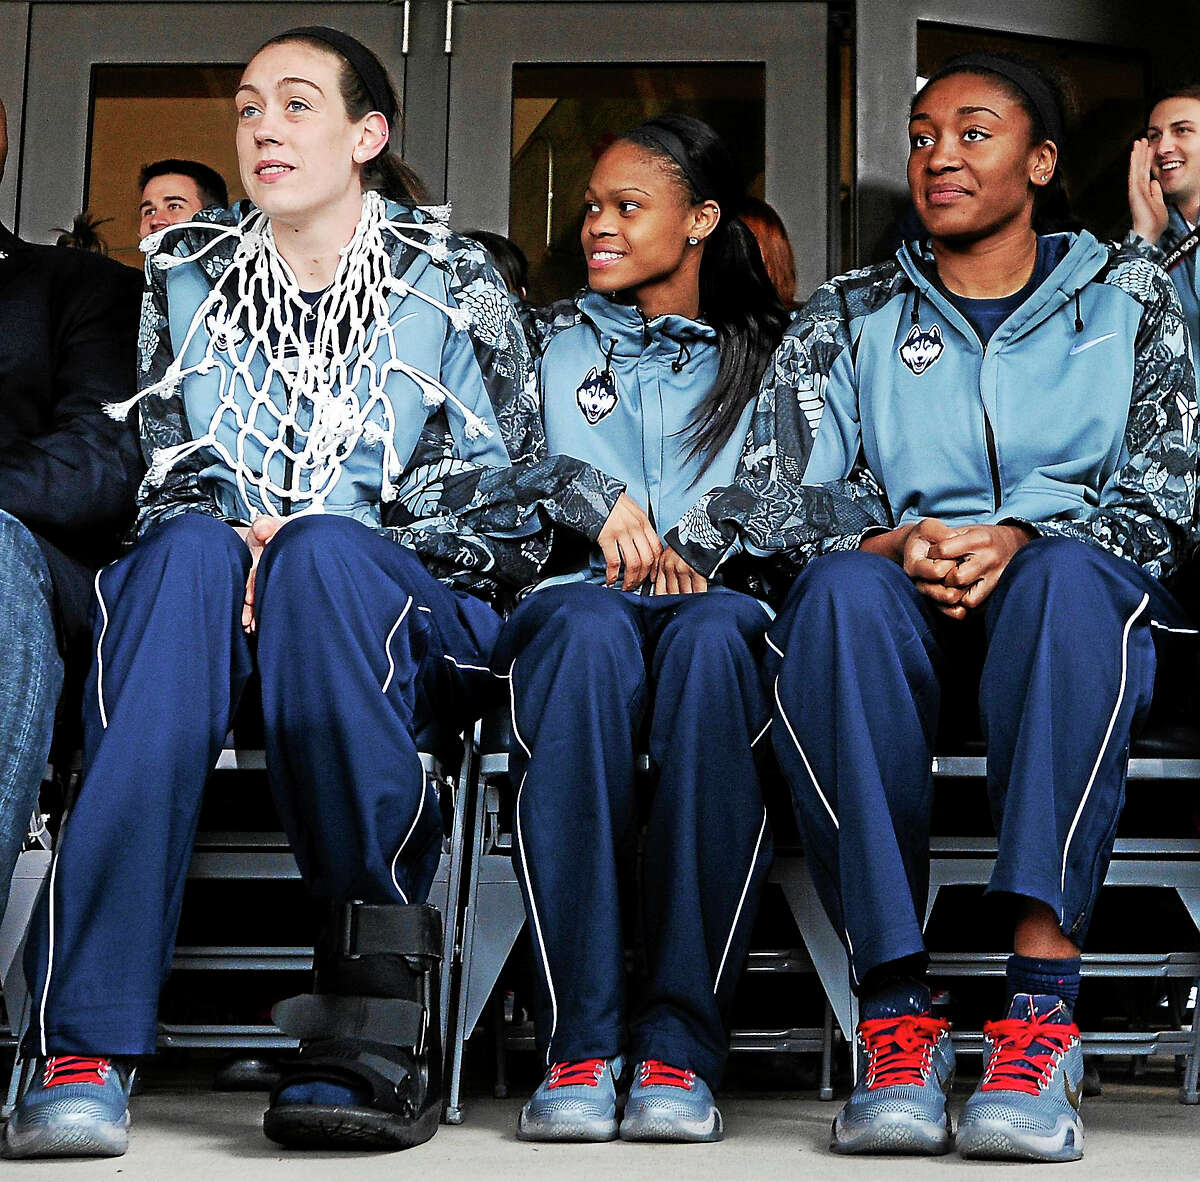 Led by Breanna Stewart, left, Moriah Jefferson, center and Morgan Tuck, the UConn women’s basketball enters the season with a chance to win a fourth consecutive national championship.